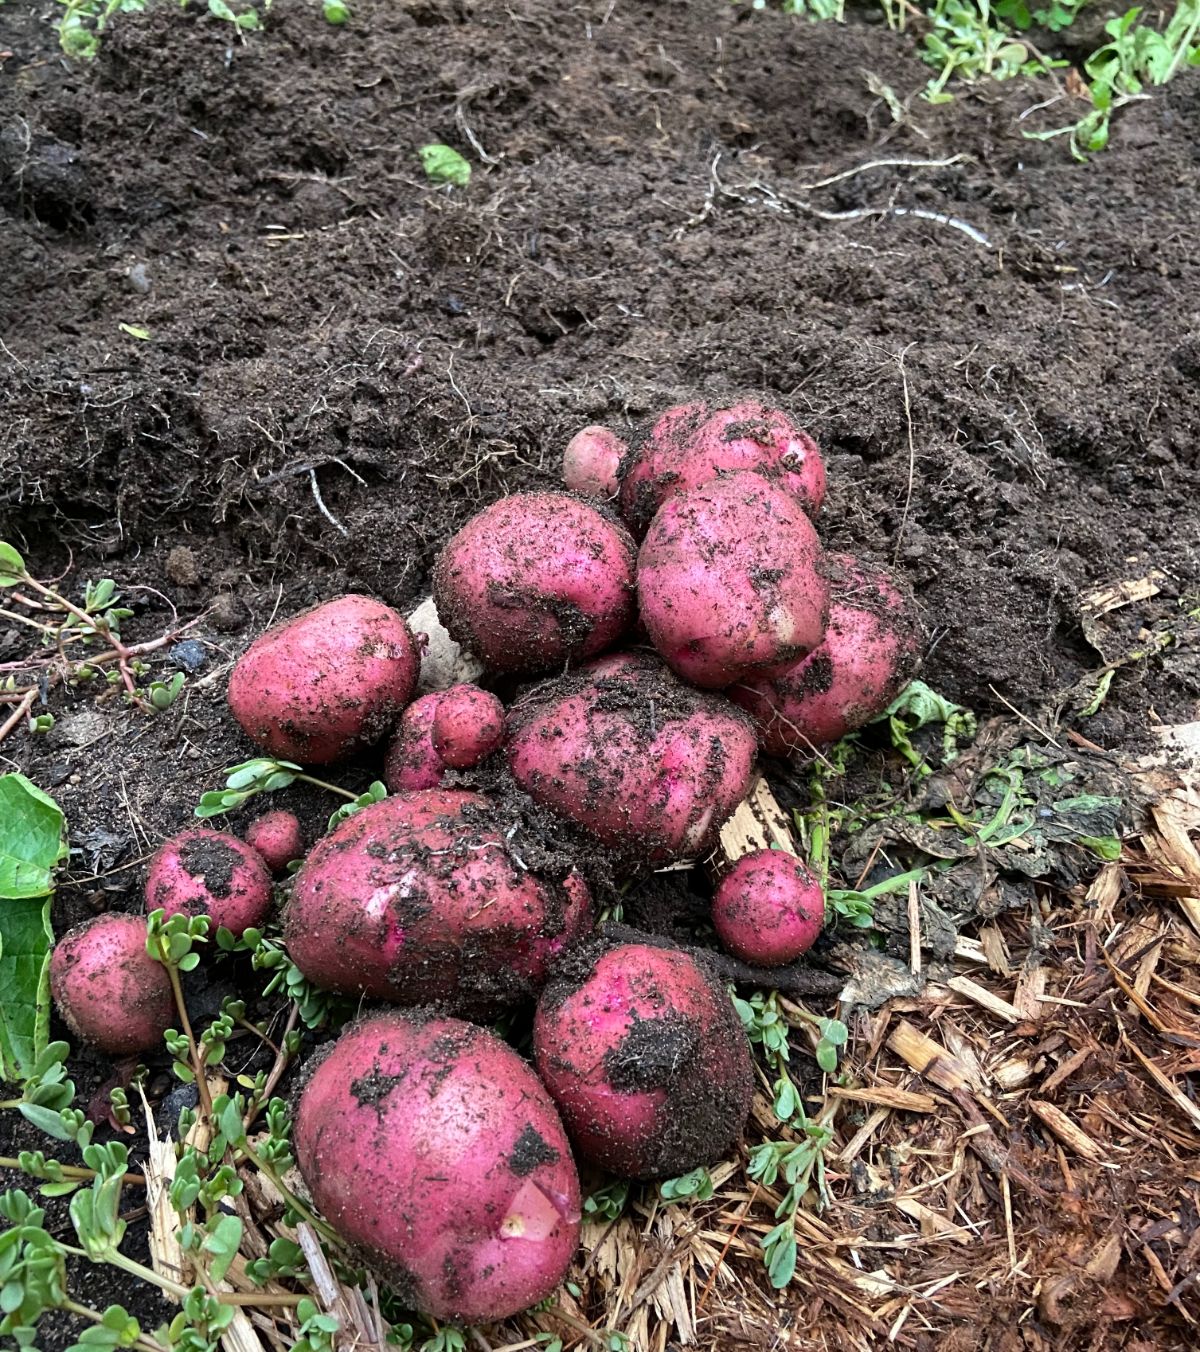 Freshly dug red potatoes laid out on the ground